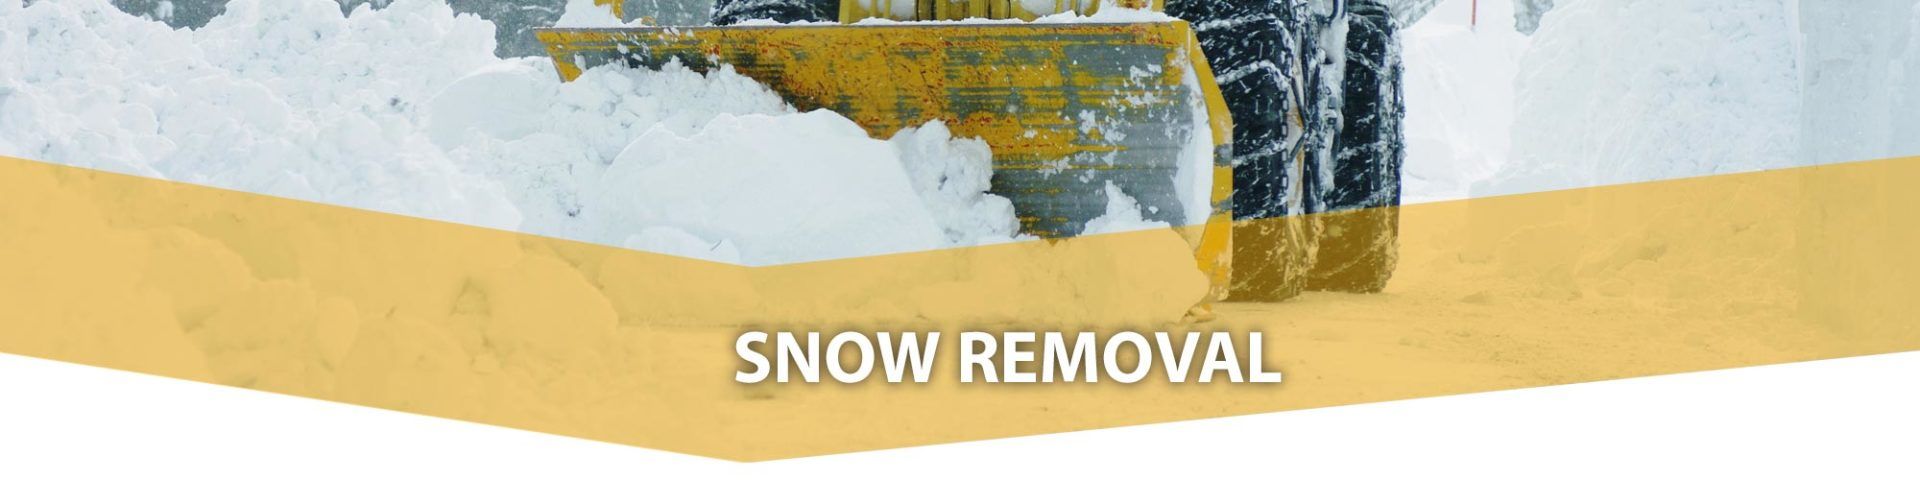 Commercial Snow Removal Services in Bloomington IL